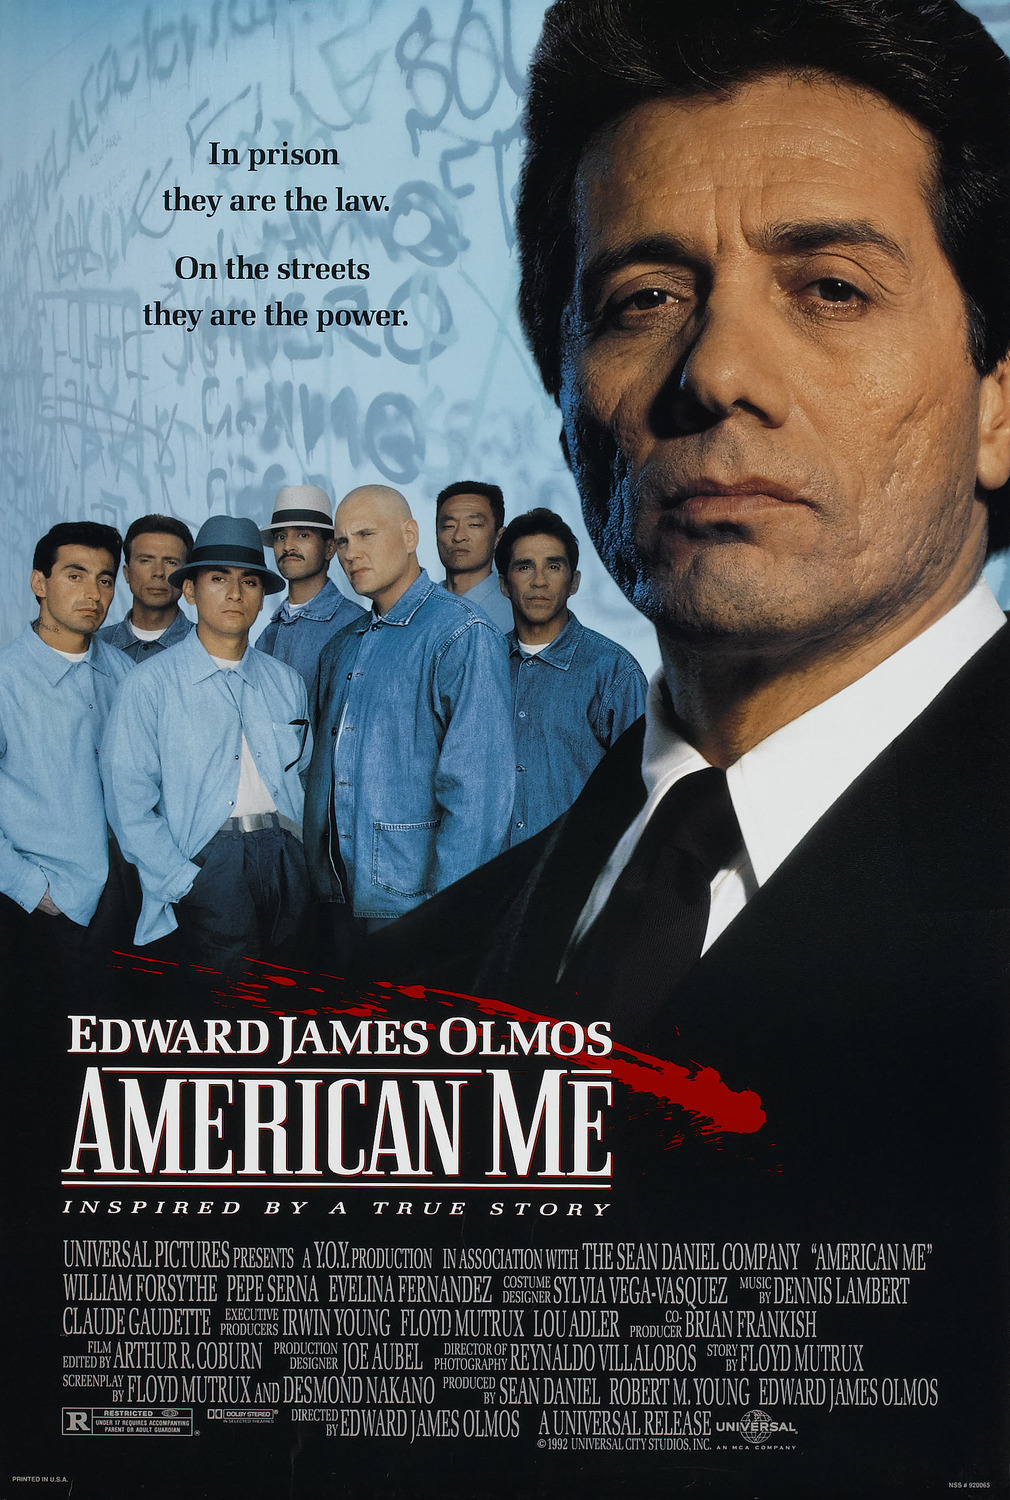 American Me is a